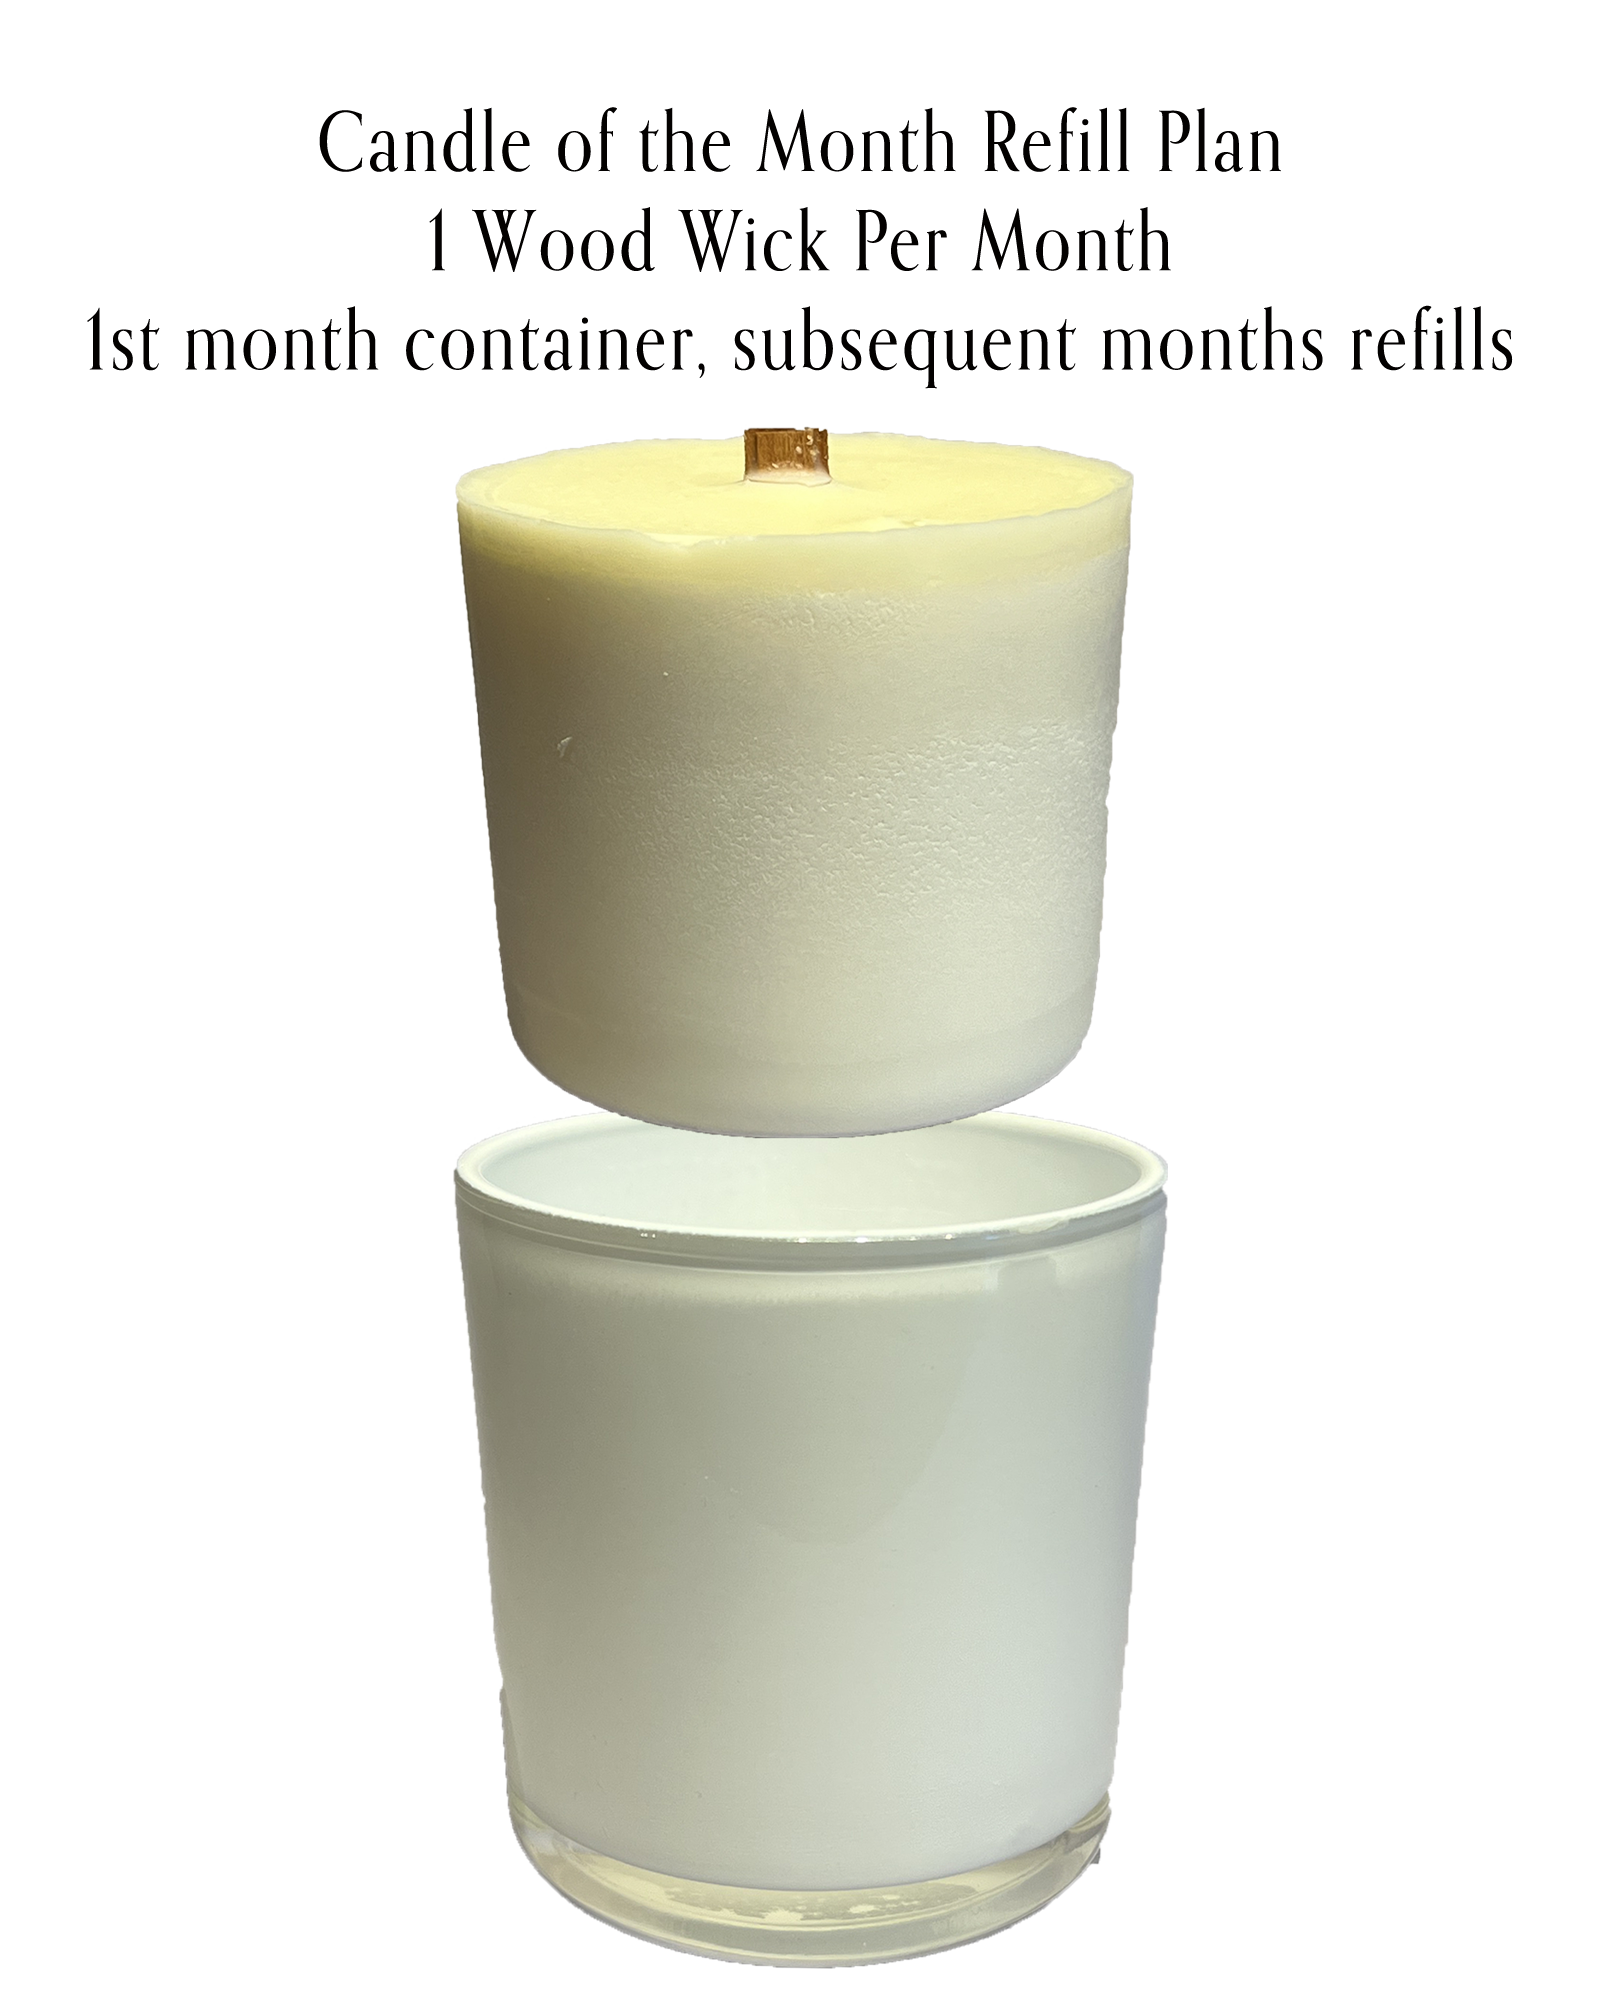 refill candle wax, refill candle wax Suppliers and Manufacturers at